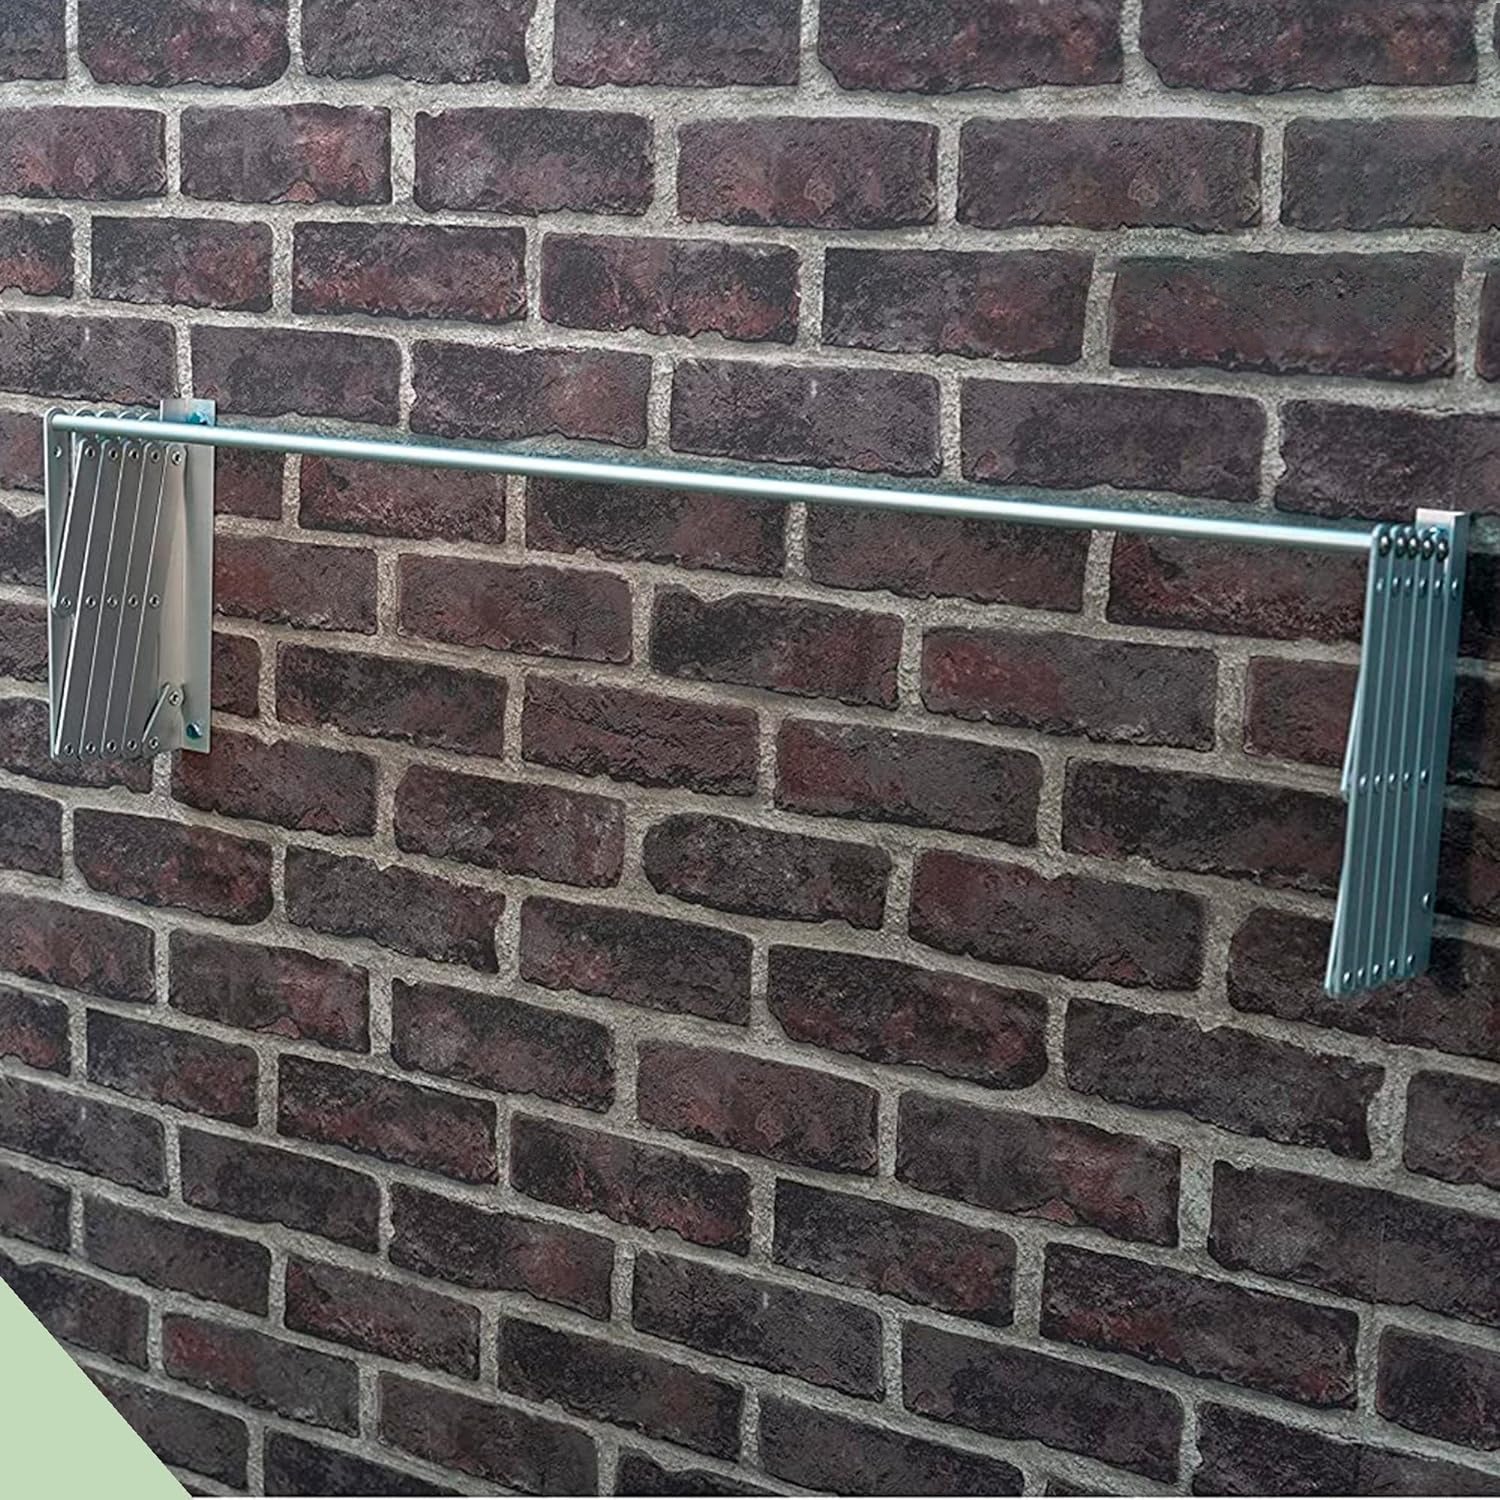  Wall-mounted extendable clothes hanger on the wall